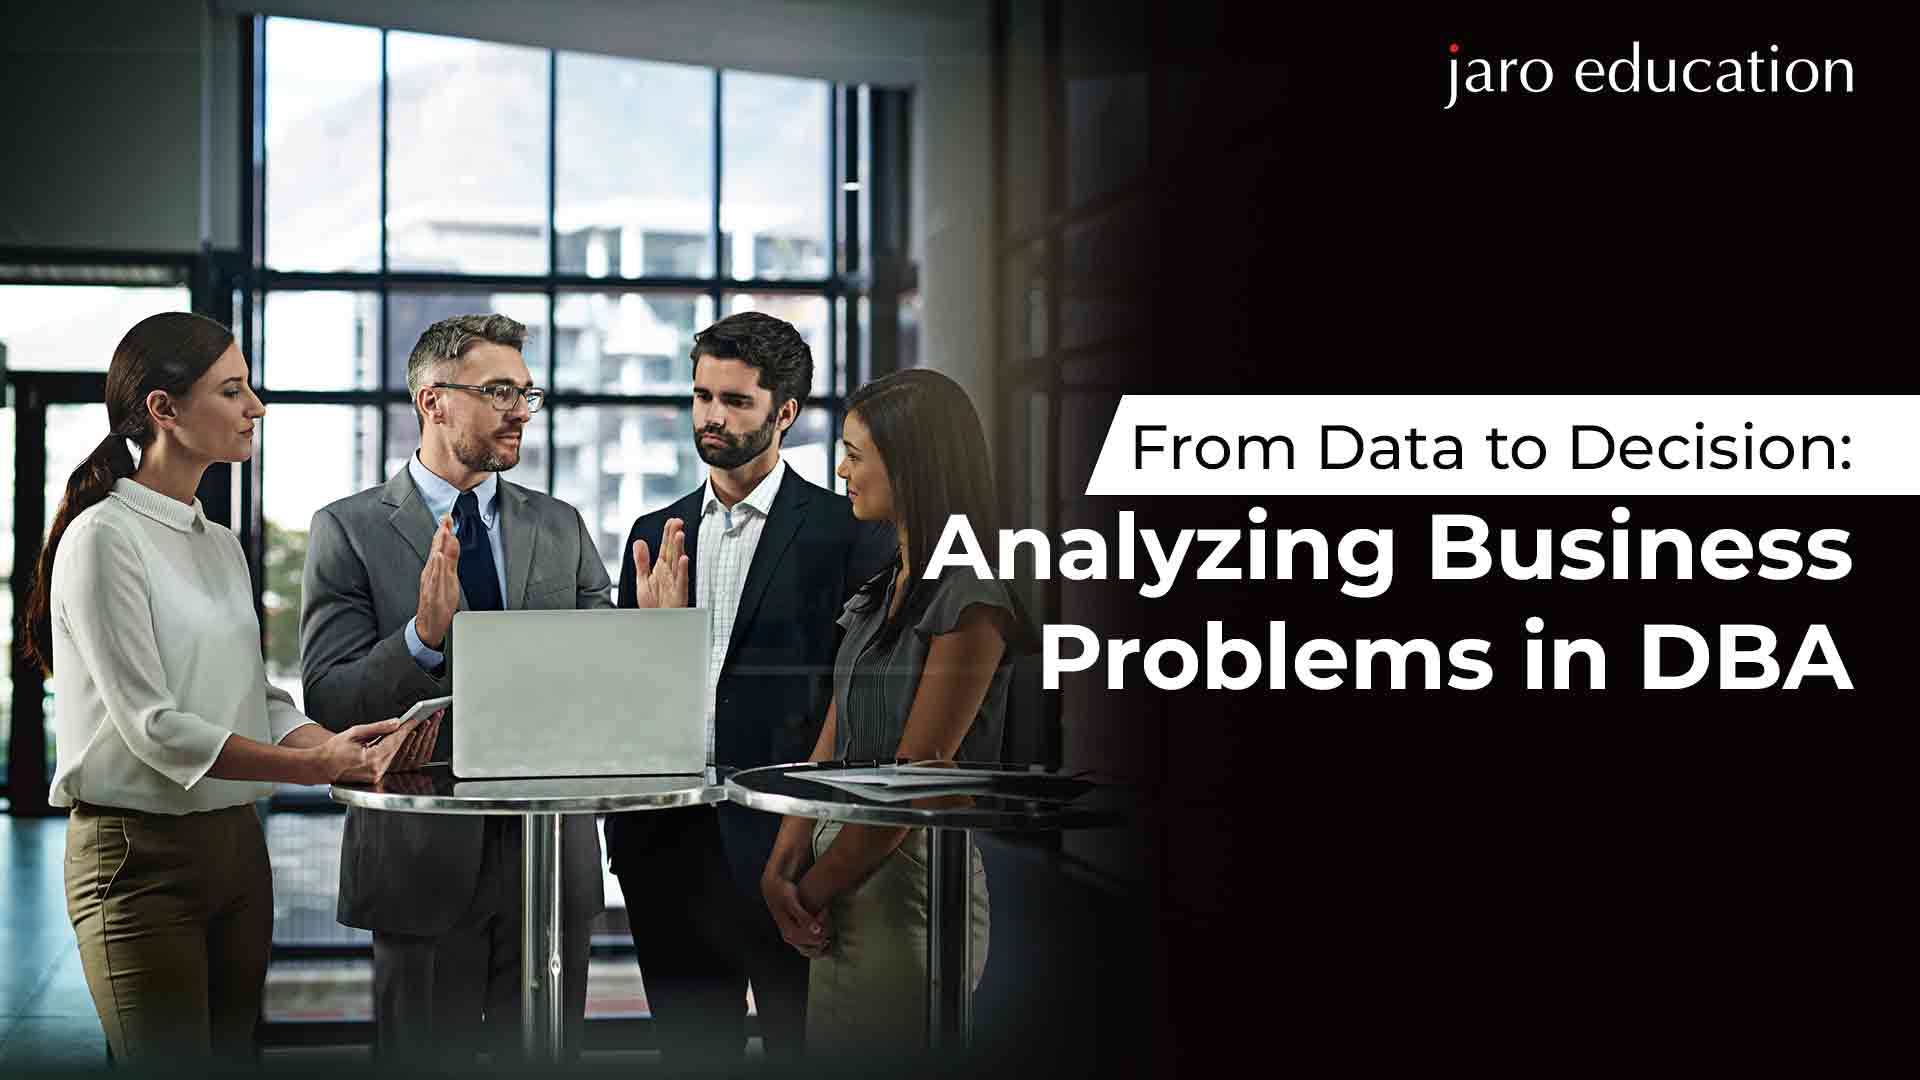 From Data To Decision Analyzing Business Problems In DBA